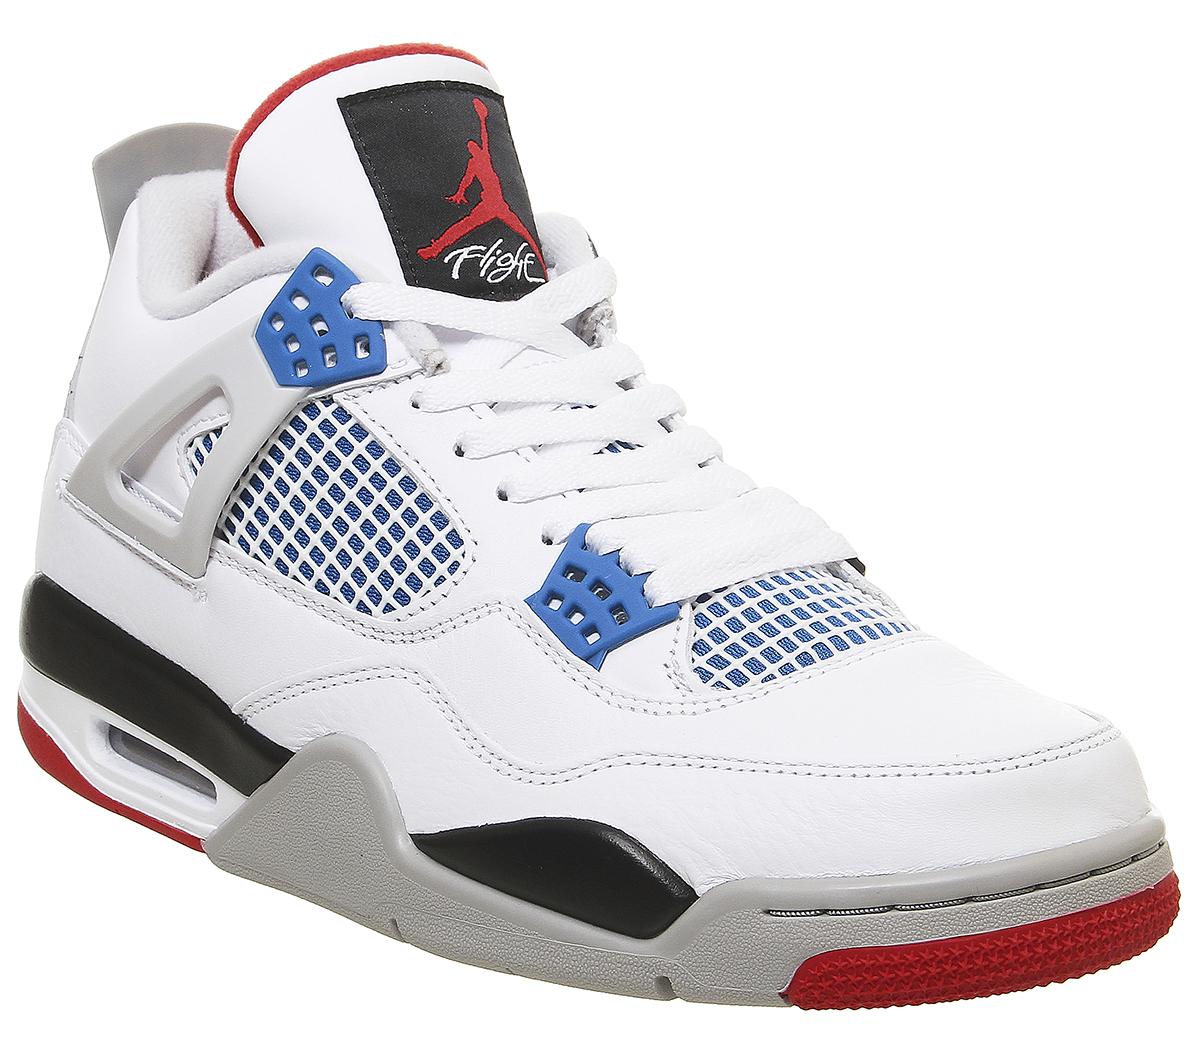 Jordan Jordan 4 Retro Trainers What The White Military Blue Red His Trainers